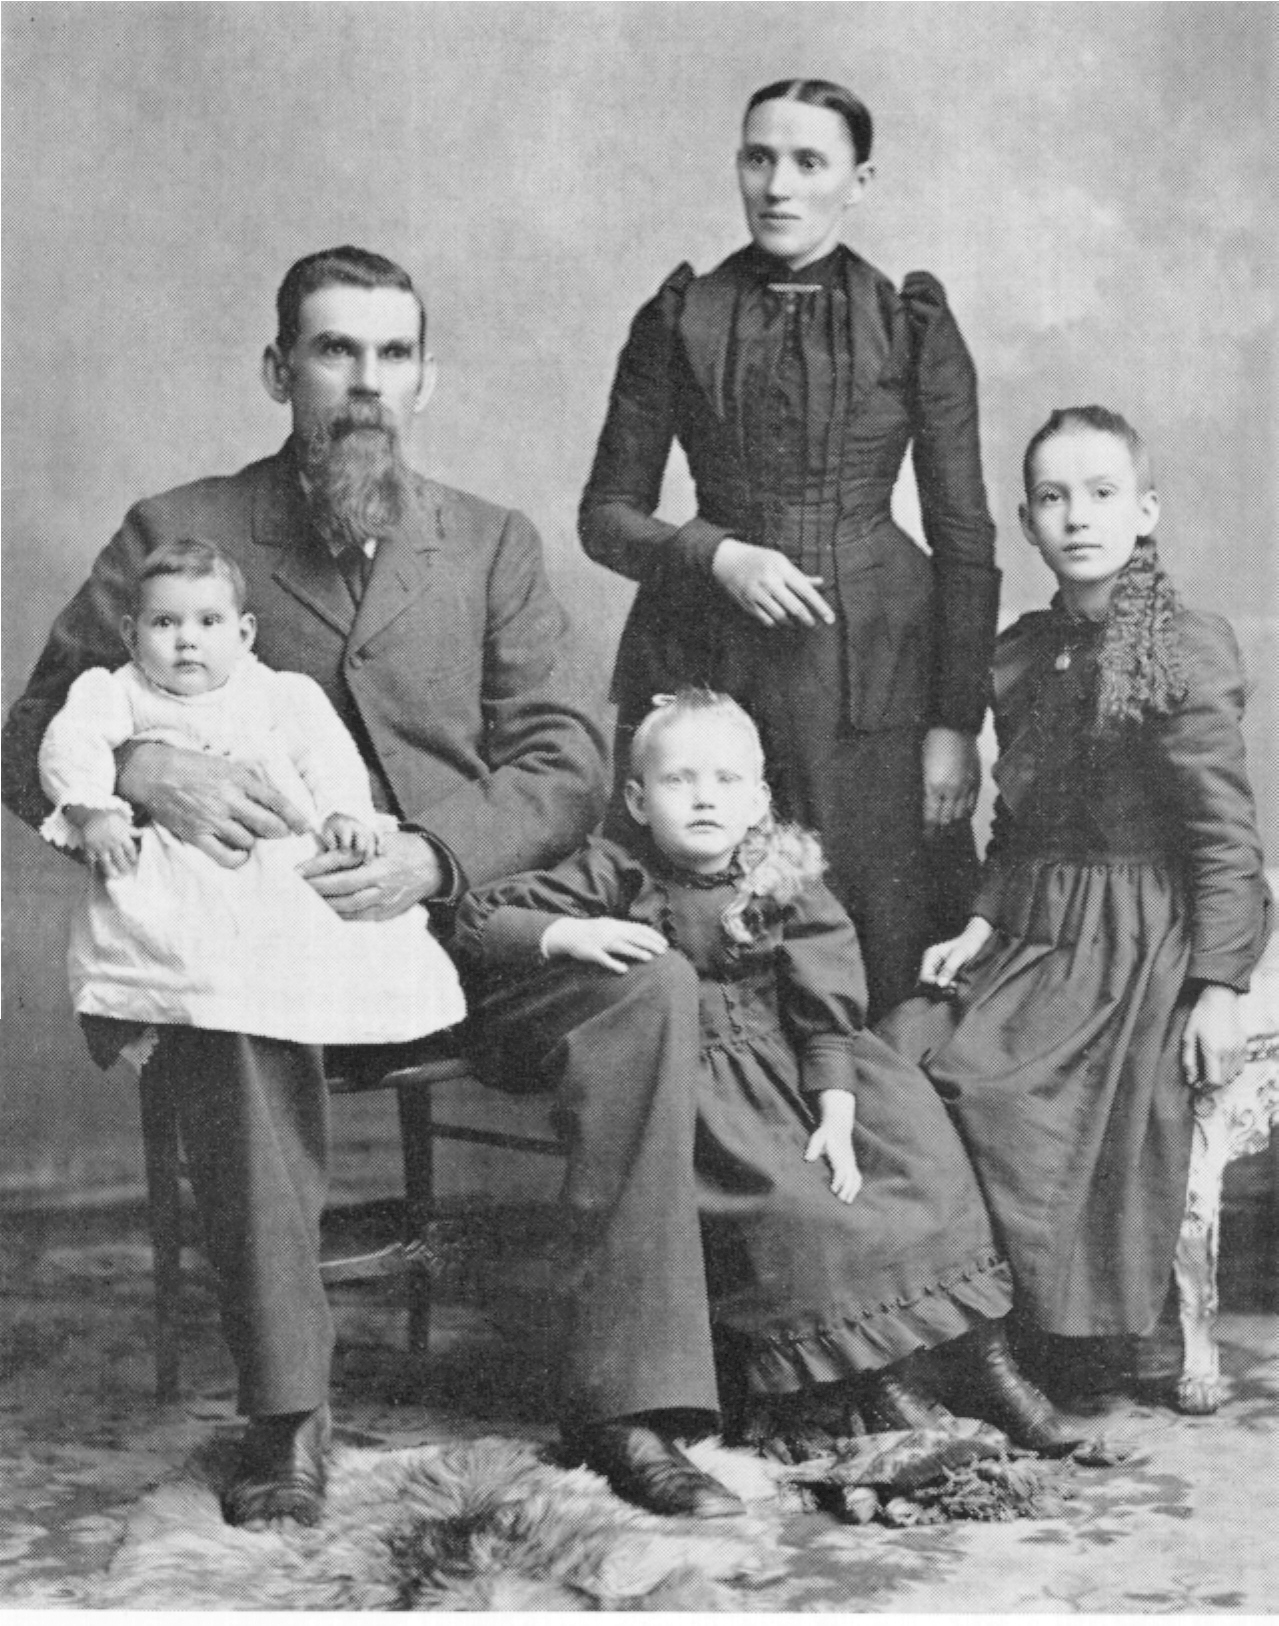 Benjamin Chamberlin Critchlow and Elizabeth Frances Fellows Critchlow family c. 1894